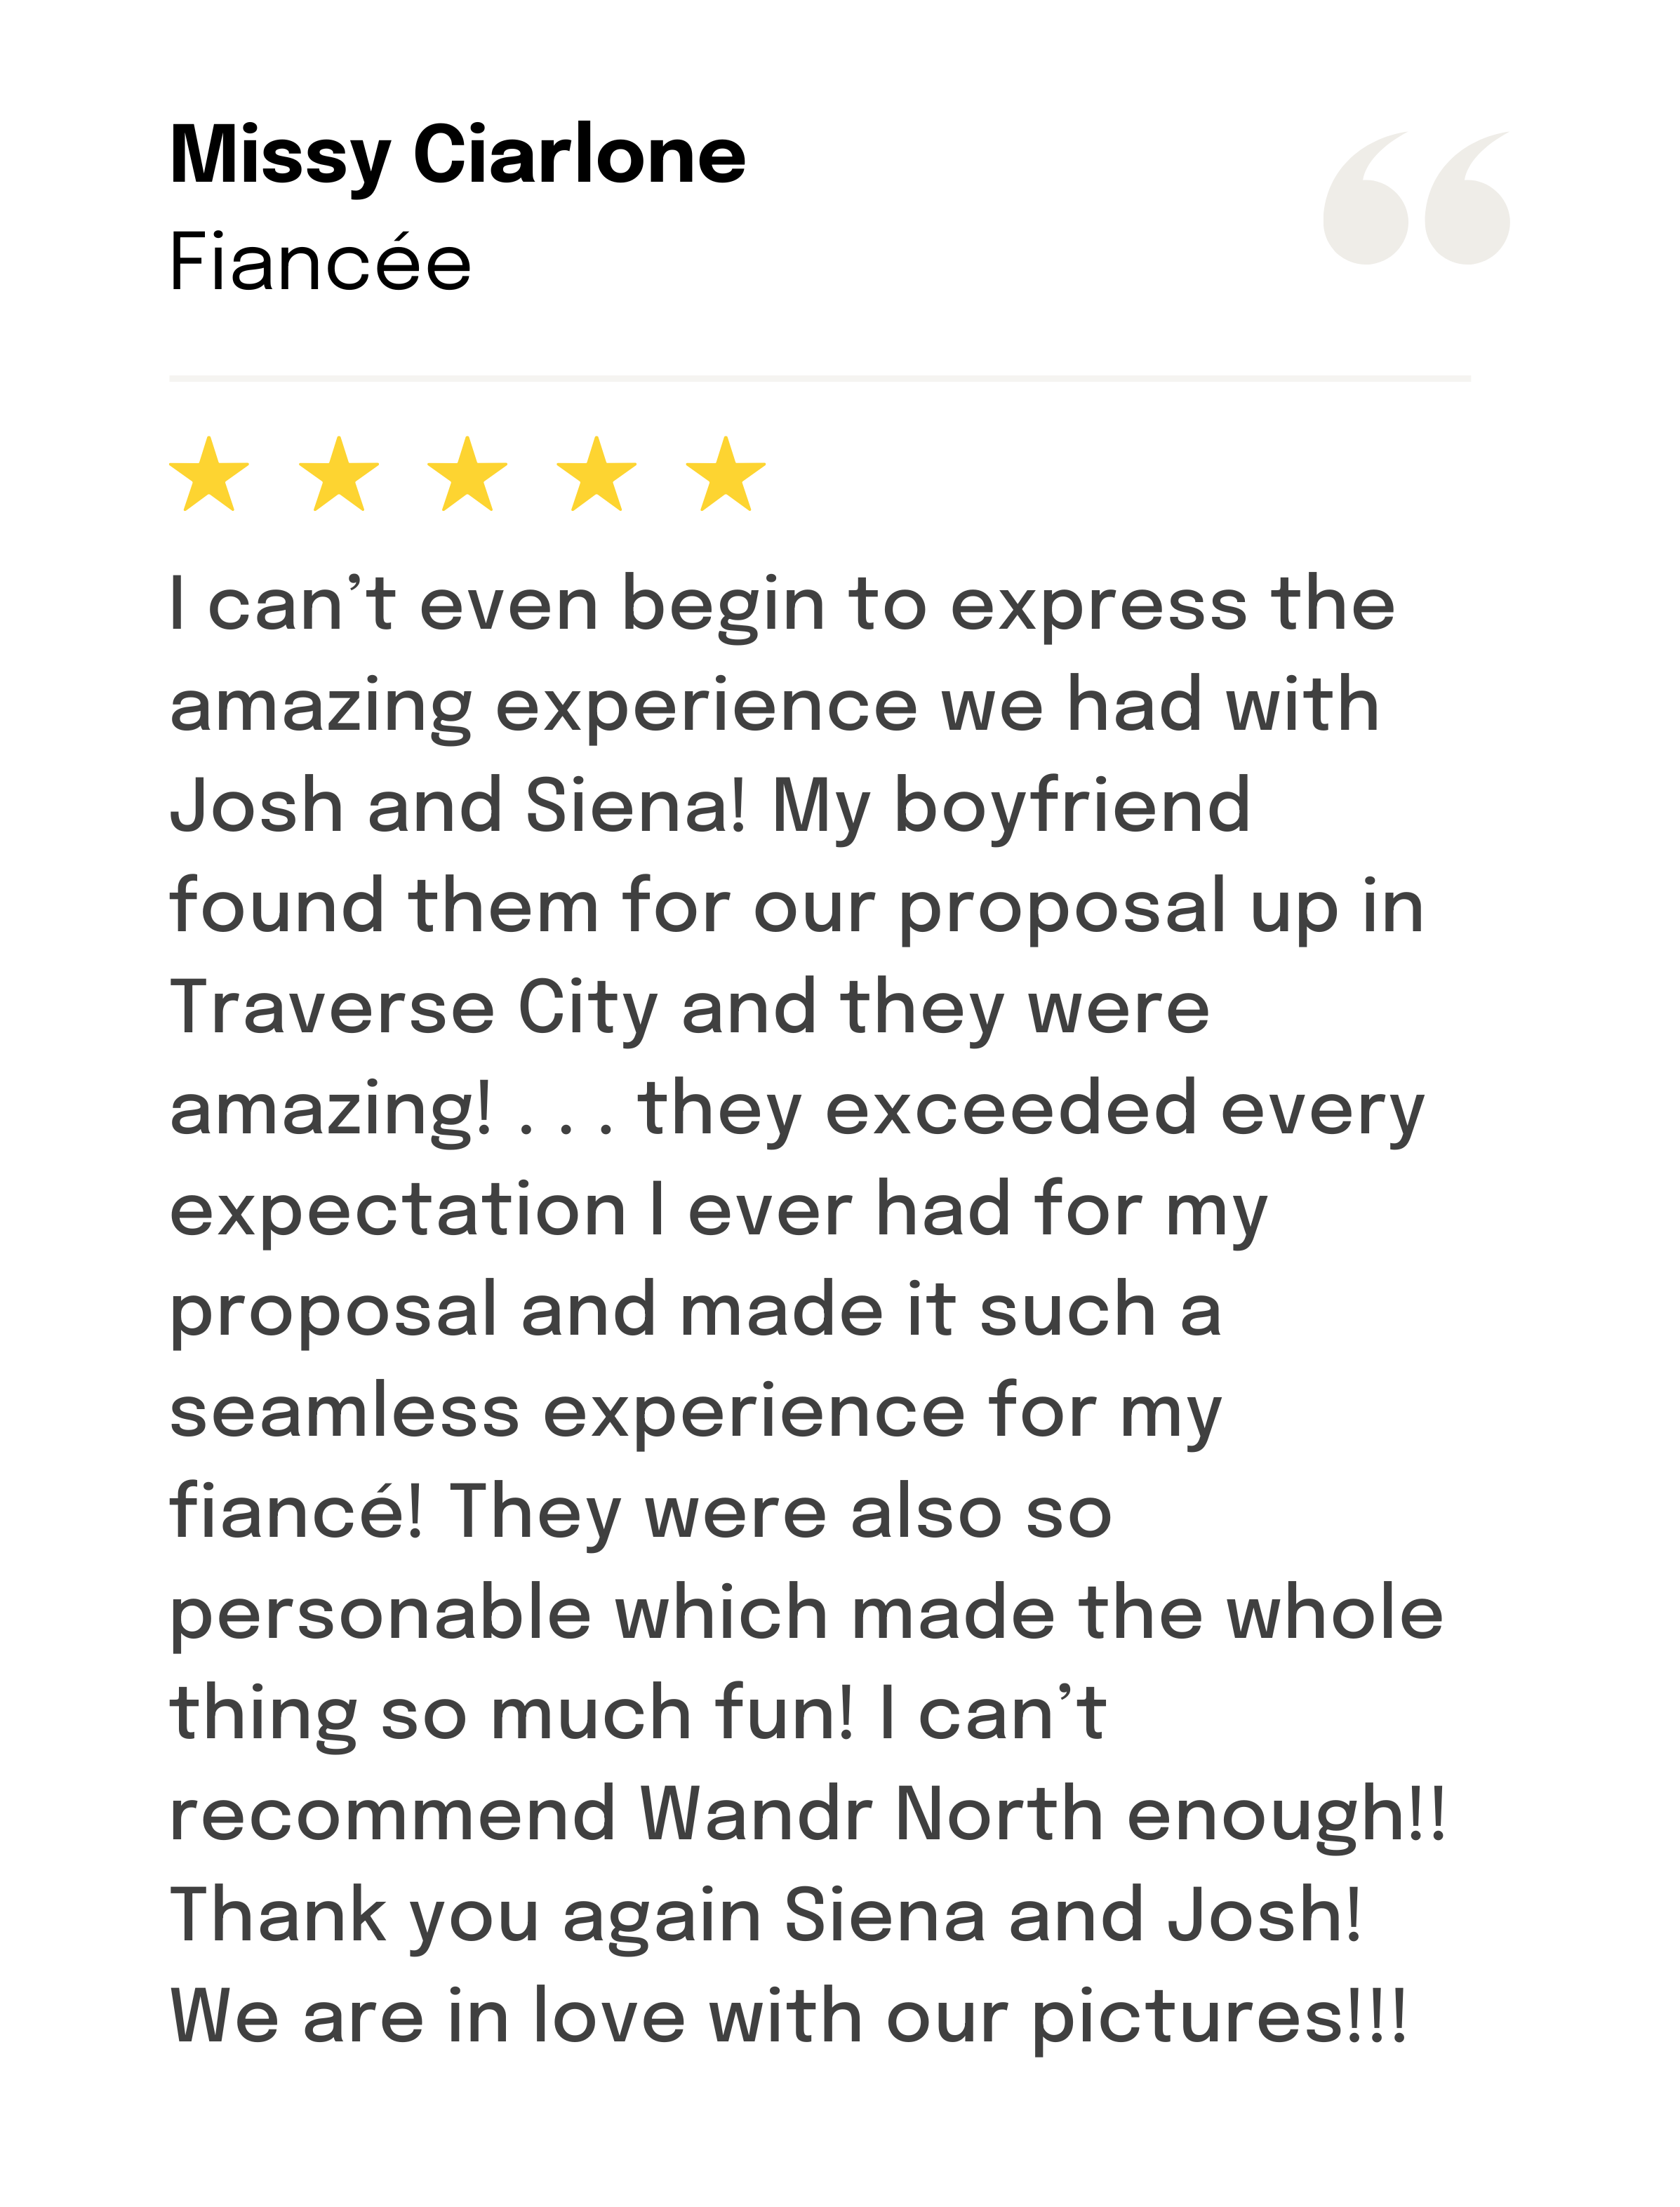 Missy writes a 5-star review to Wandr North for their proposal photography and videography services.